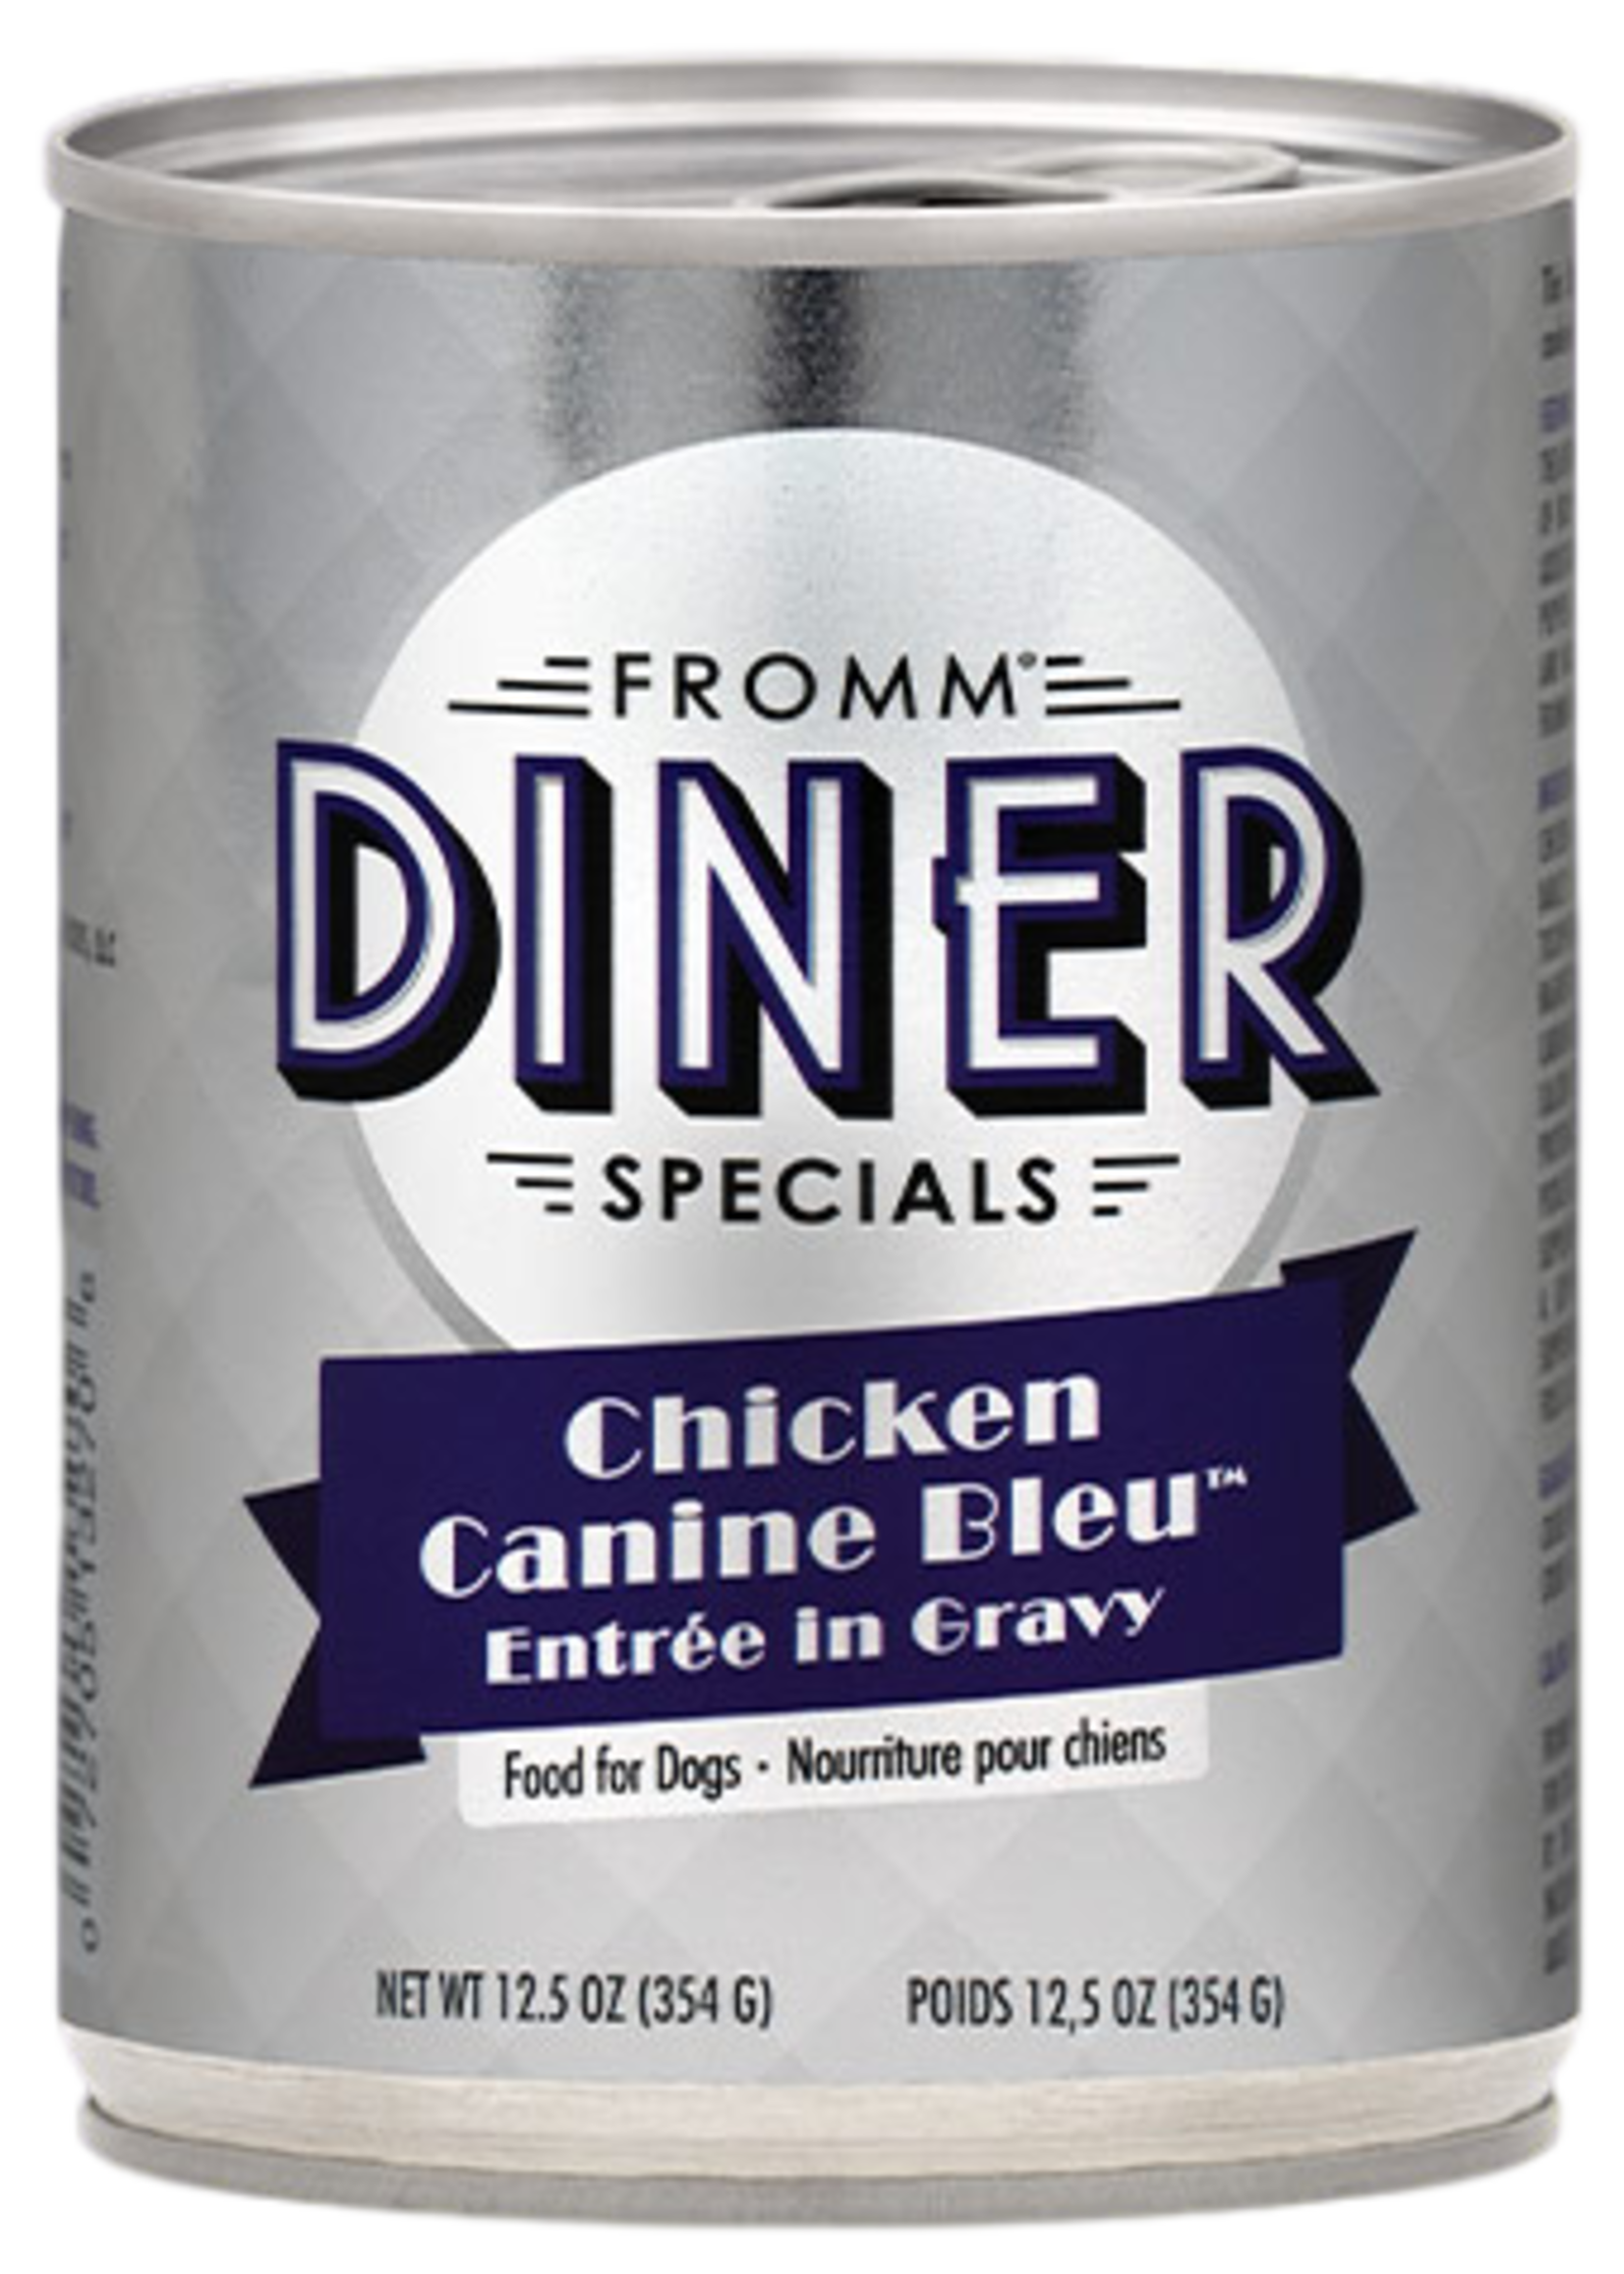 Fromm Family Foods Fromm, D, Diner Specials, Chicken Canine Bleu in Gravy, 12.5oz